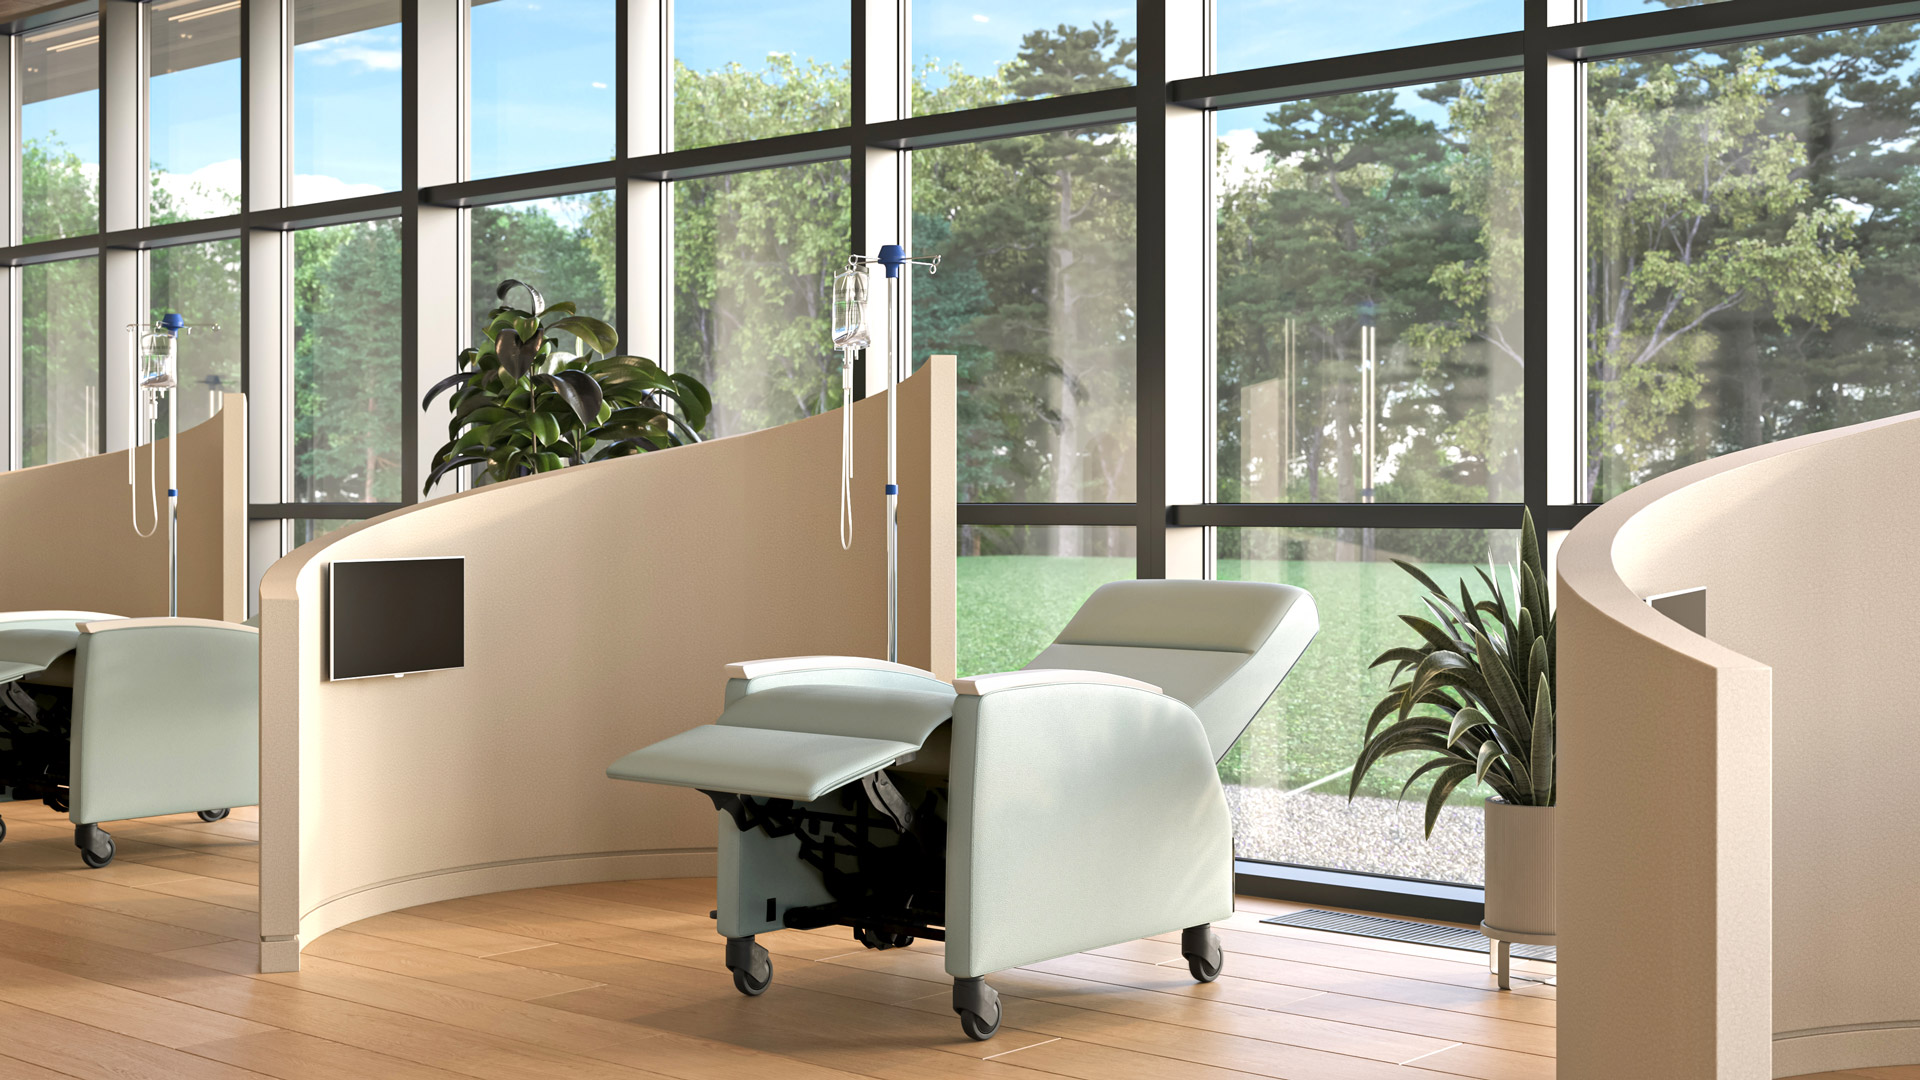 Ergonomic and welcoming healthcare facility 